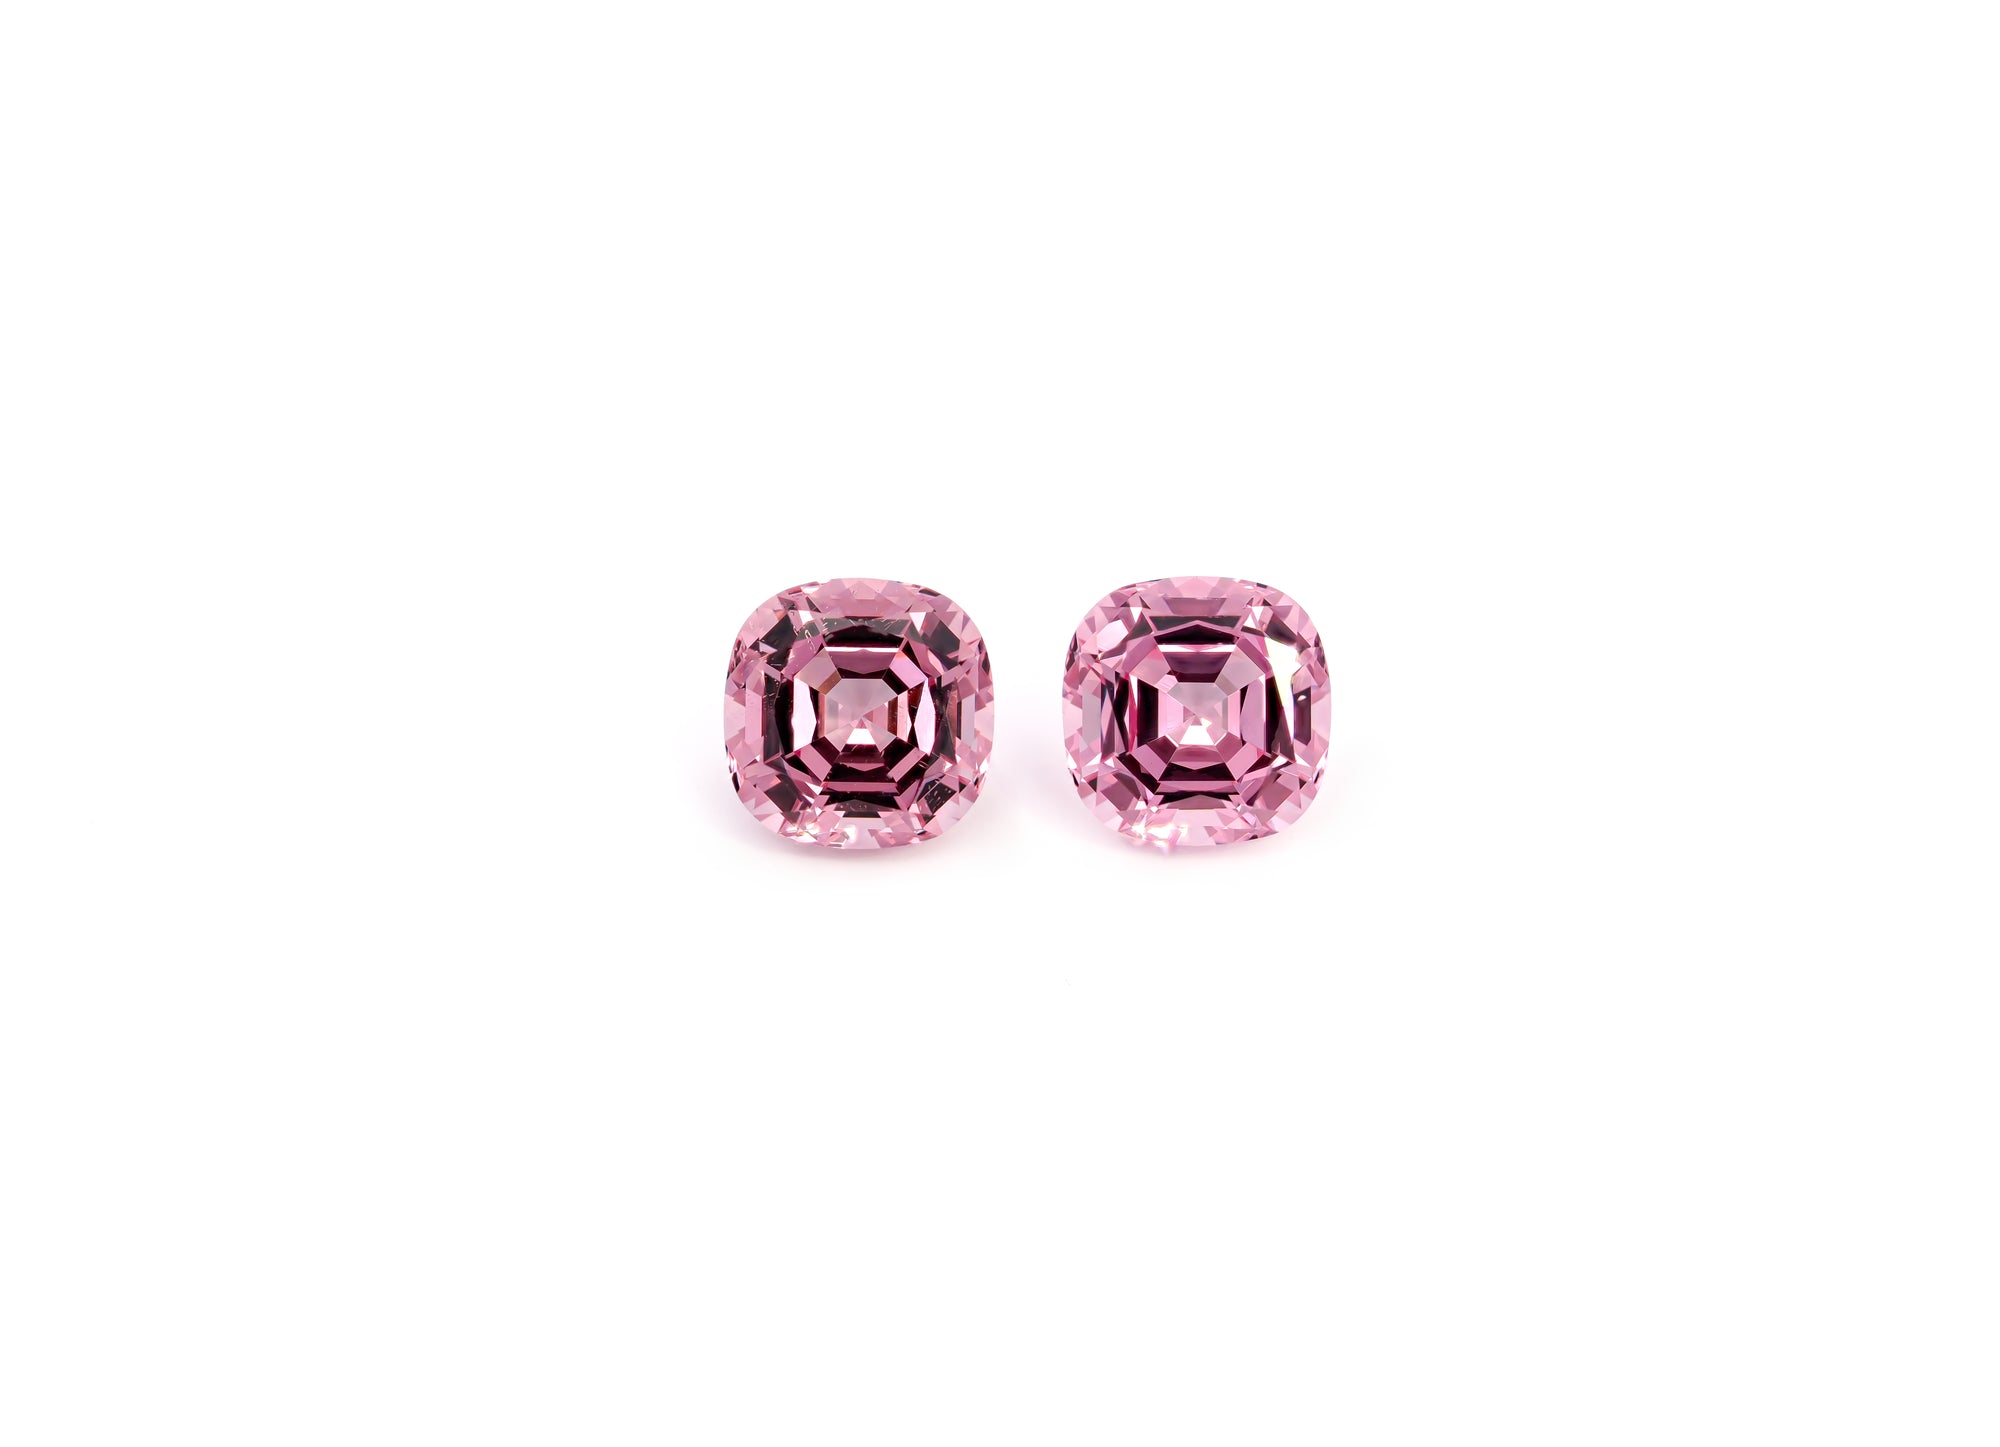 Pink spinel 3.83ct-2